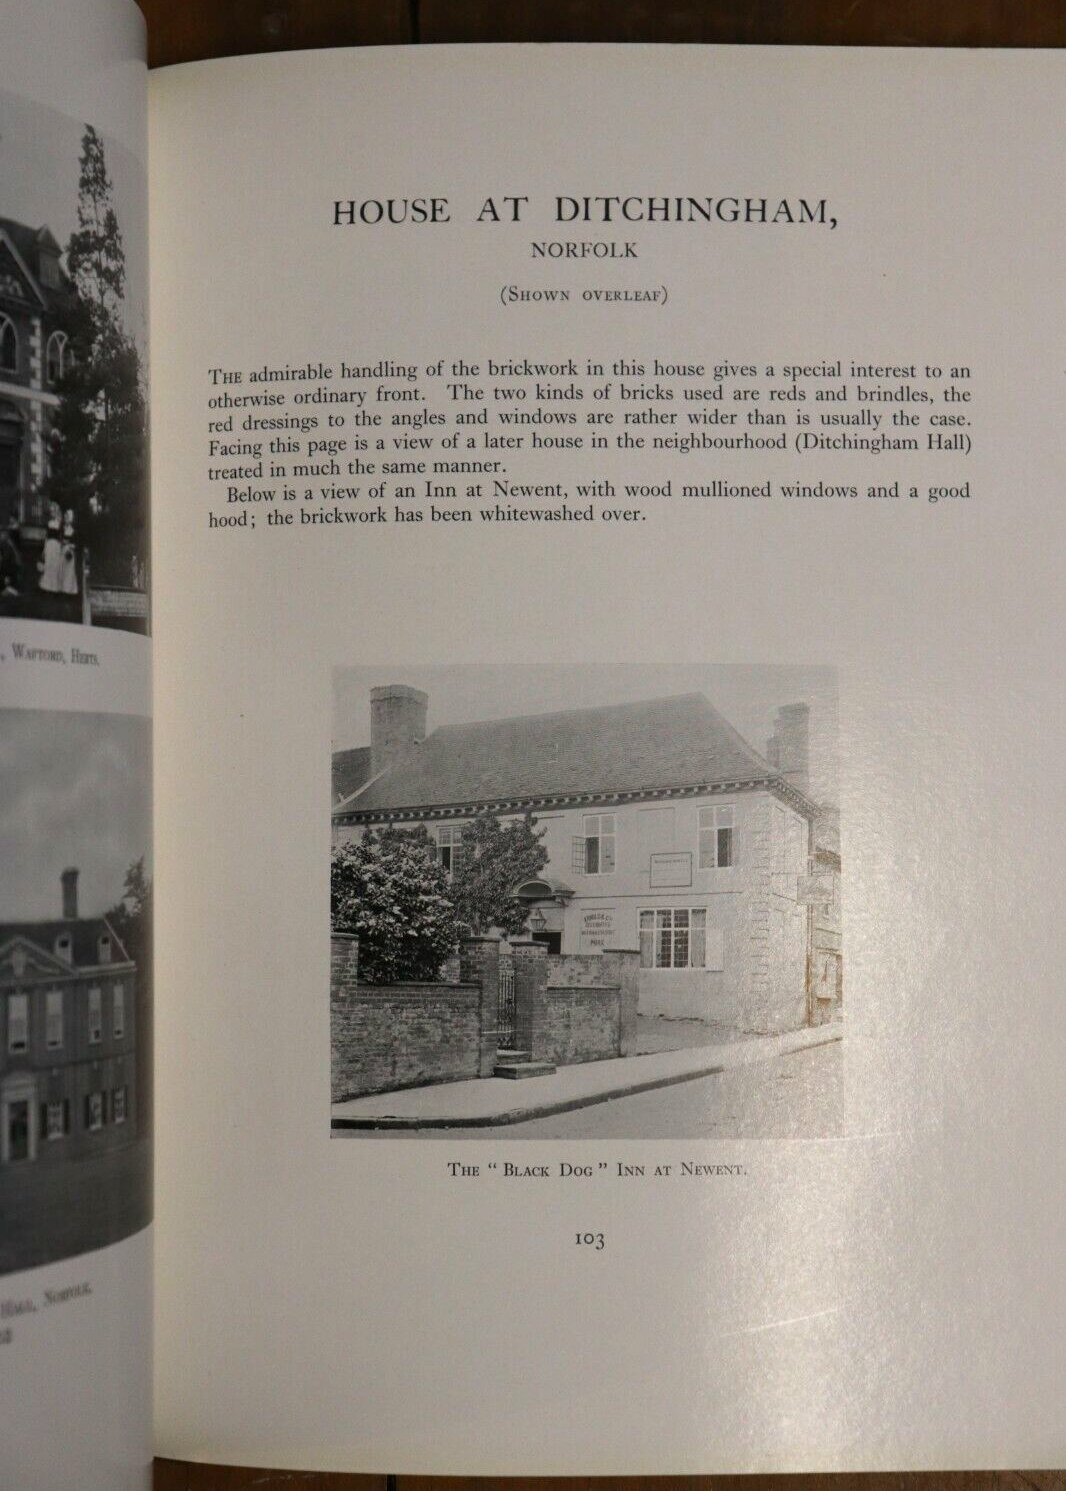 1928 English Domestic Architecture by Horace Field Antique Reference Book